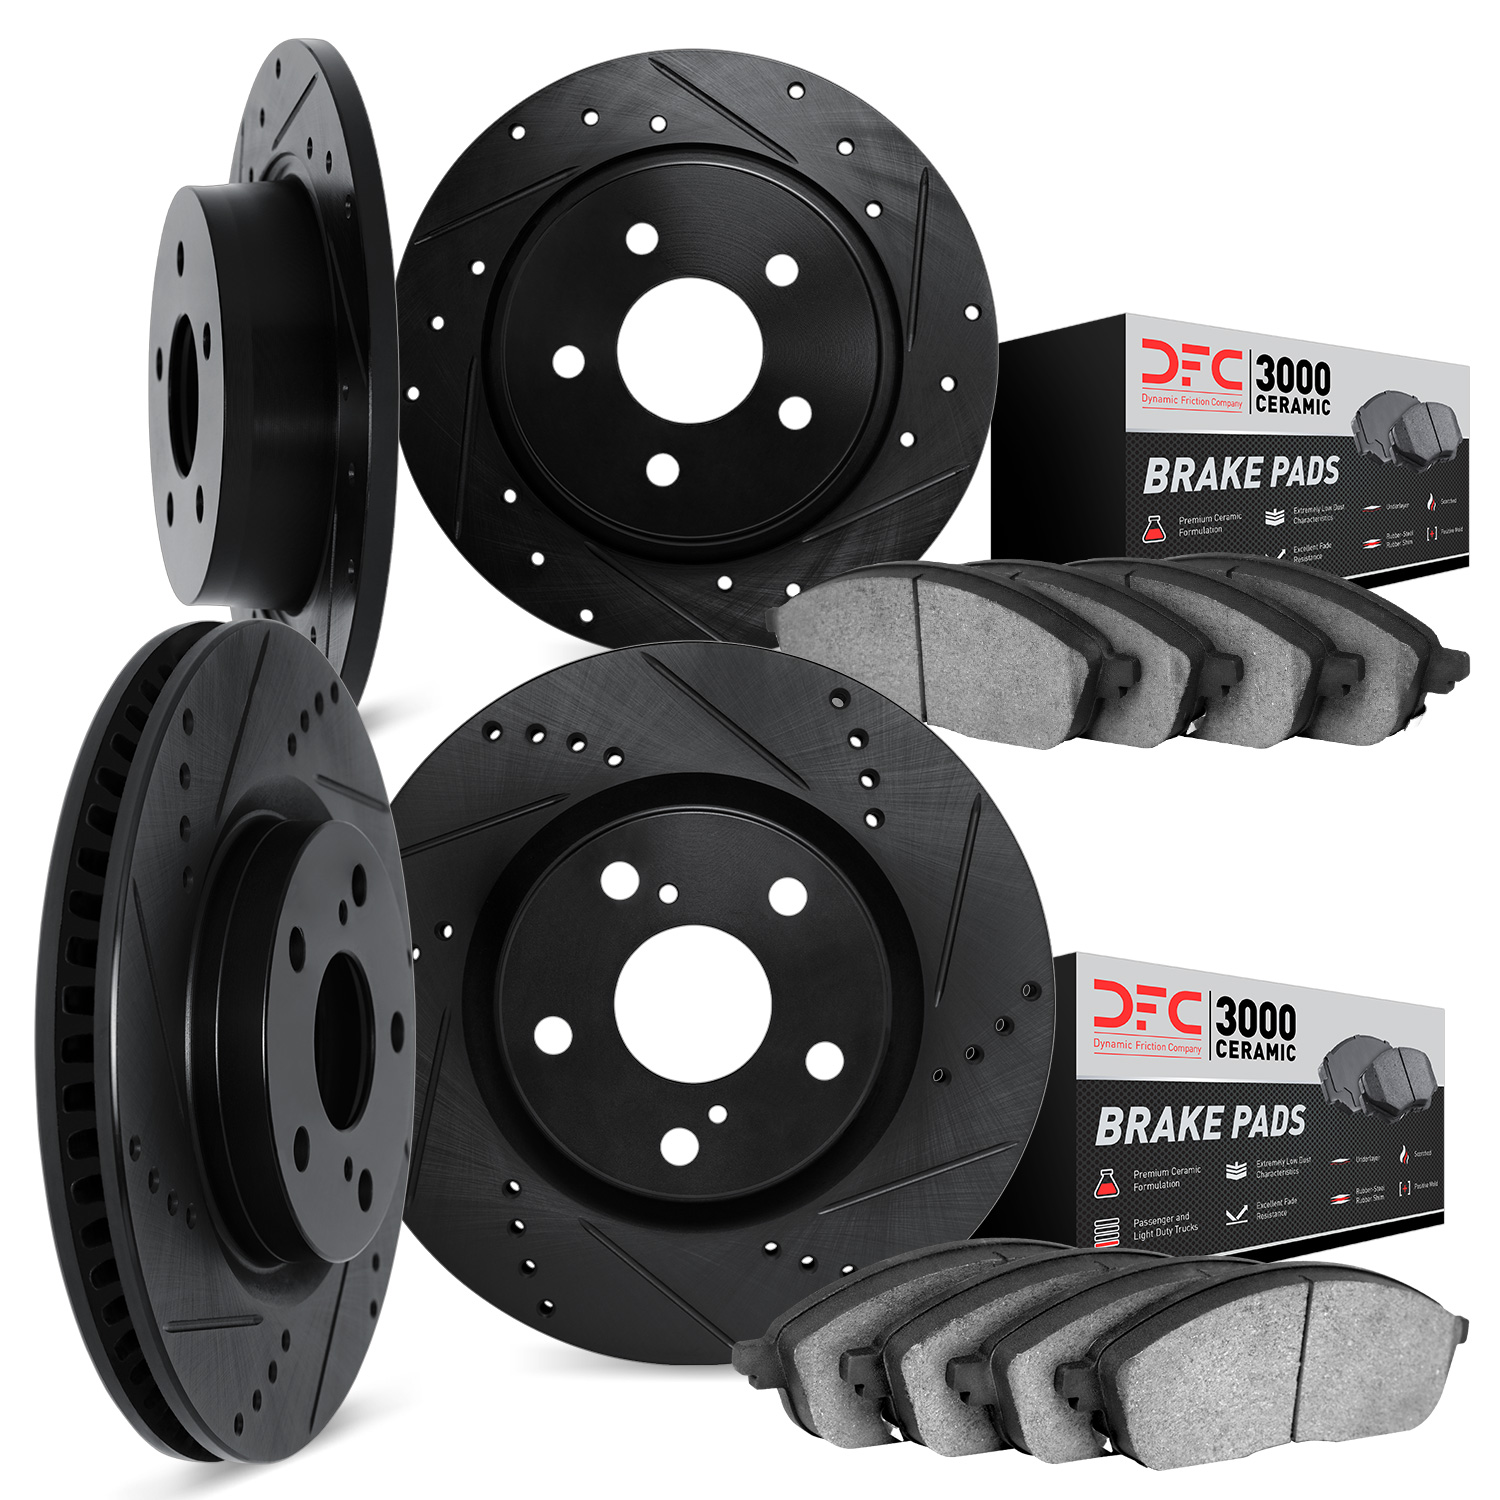 8304-59058 Drilled/Slotted Brake Rotors with 3000-Series Ceramic Brake Pads Kit [Black], 2008-2014 Acura/Honda, Position: Front